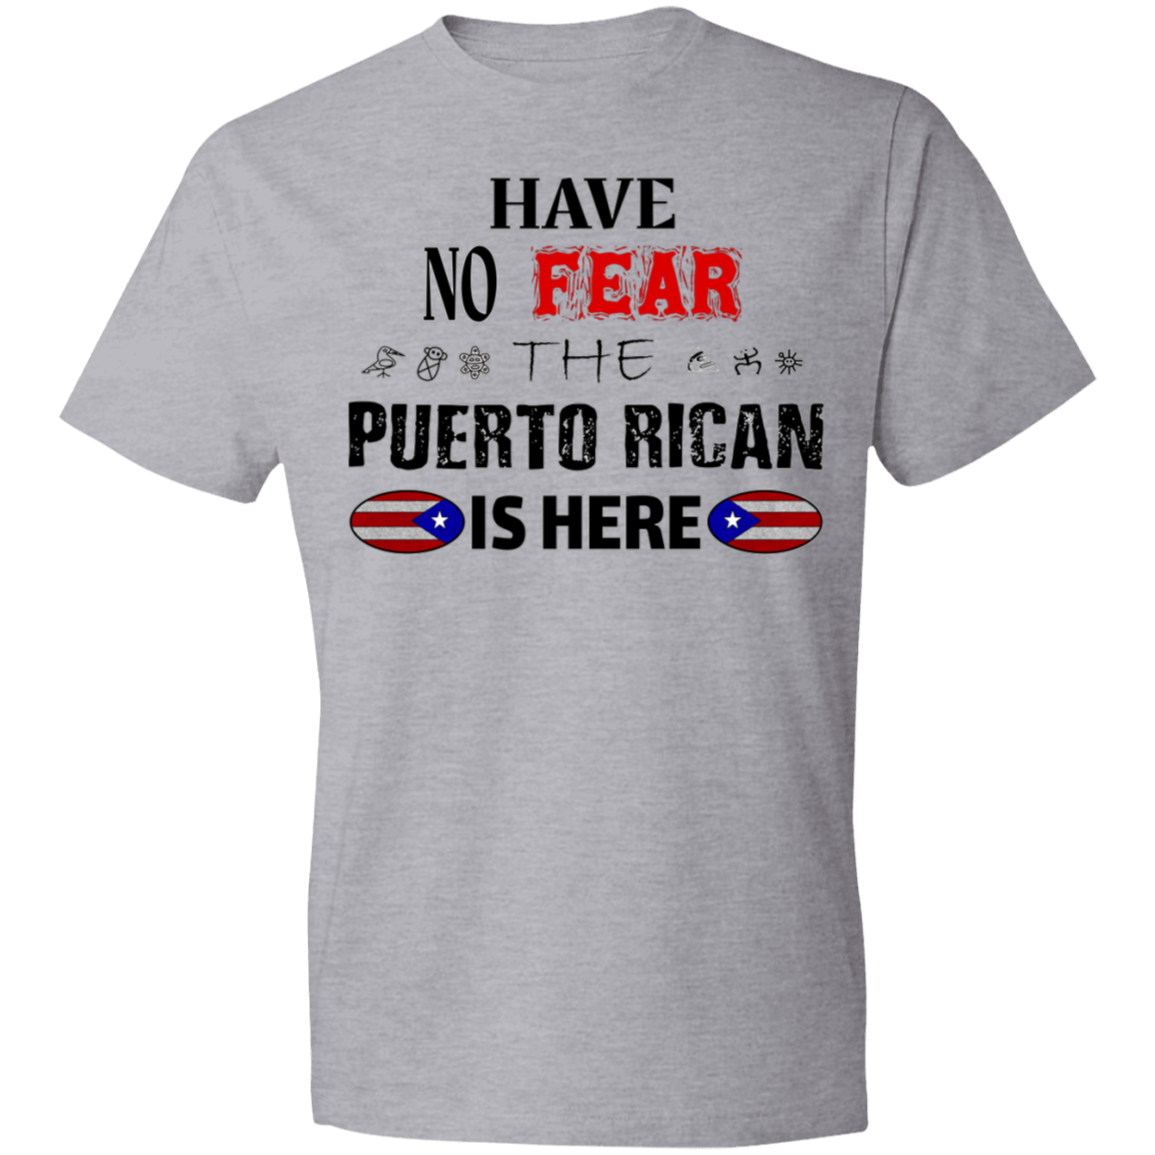 Have No Fear Lightweight T-Shirt 4.5 oz - Puerto Rican Pride